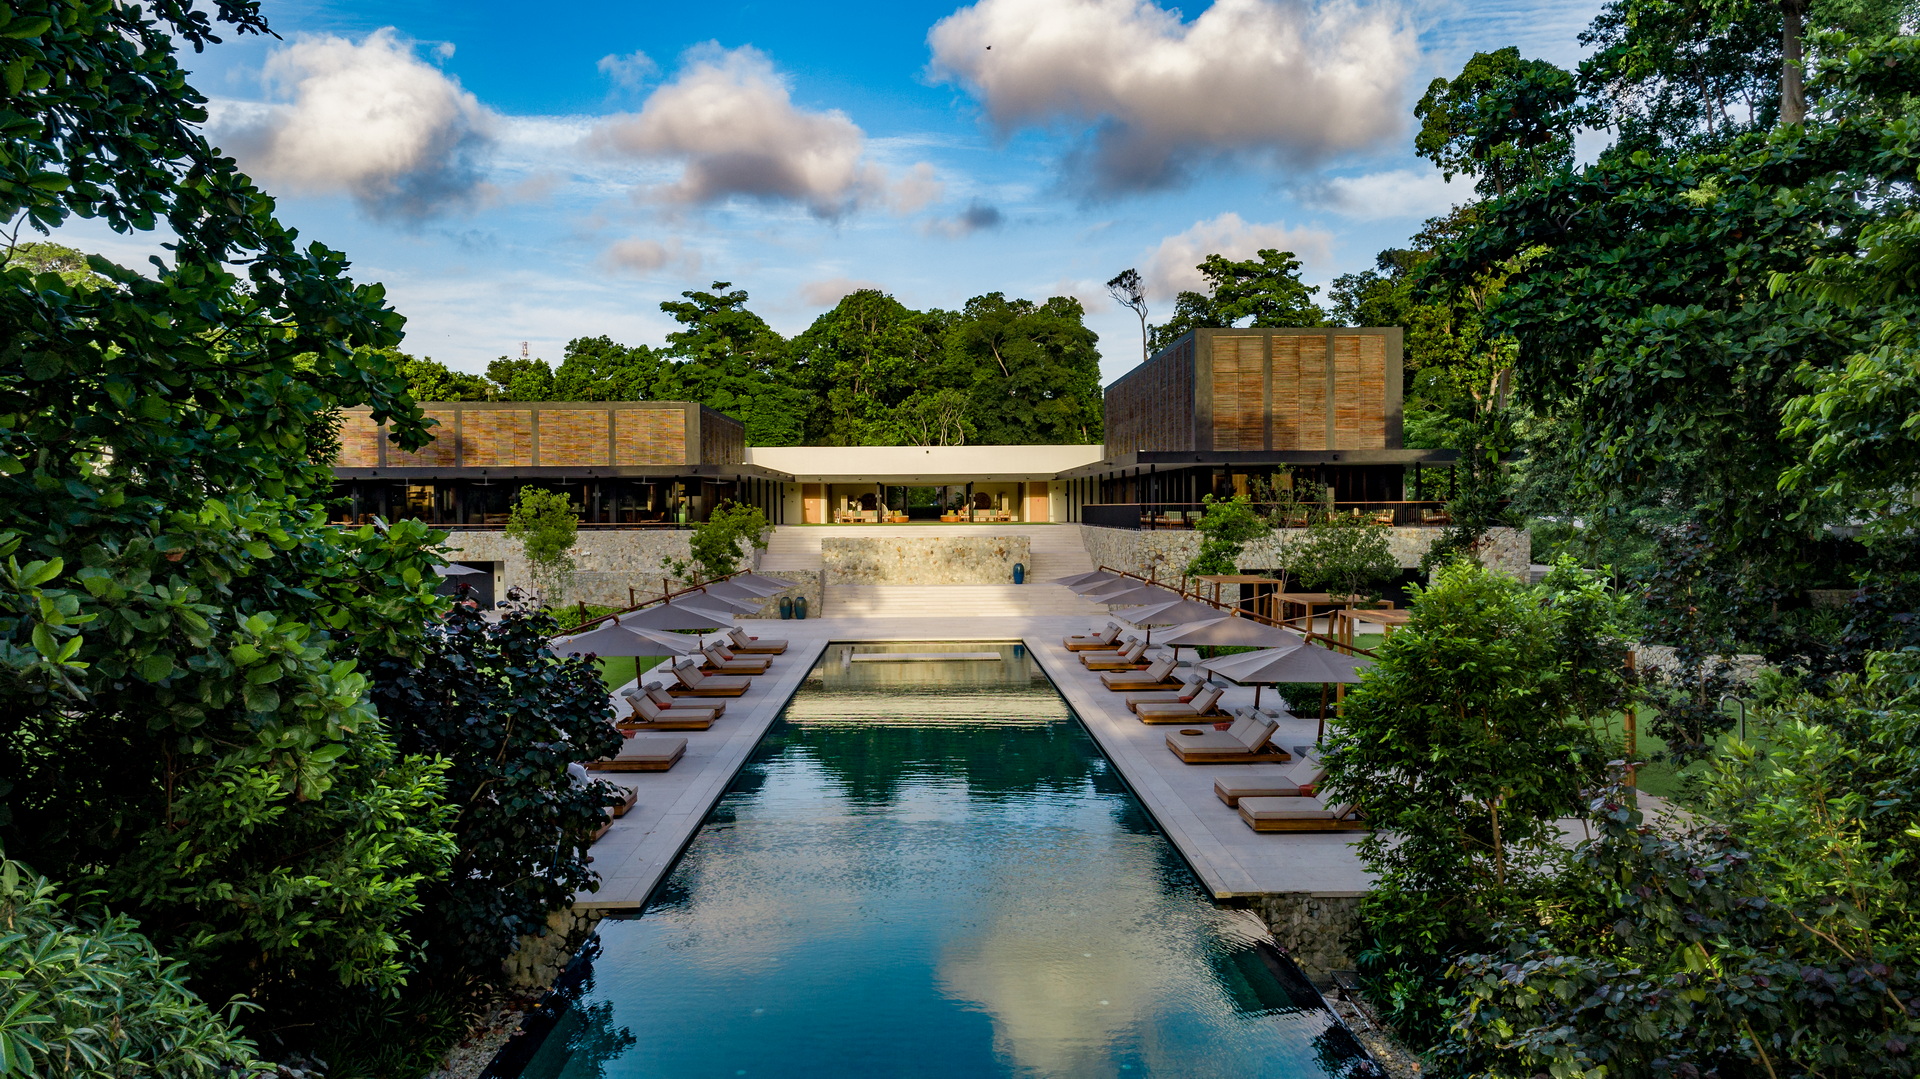 <p>A luxury resort with 46 single-storey guest suites and one private villa is located on the 25-hectare coastal site of a former golf course; a master plan foresees 50 private villas in future.&nbsp;</p>